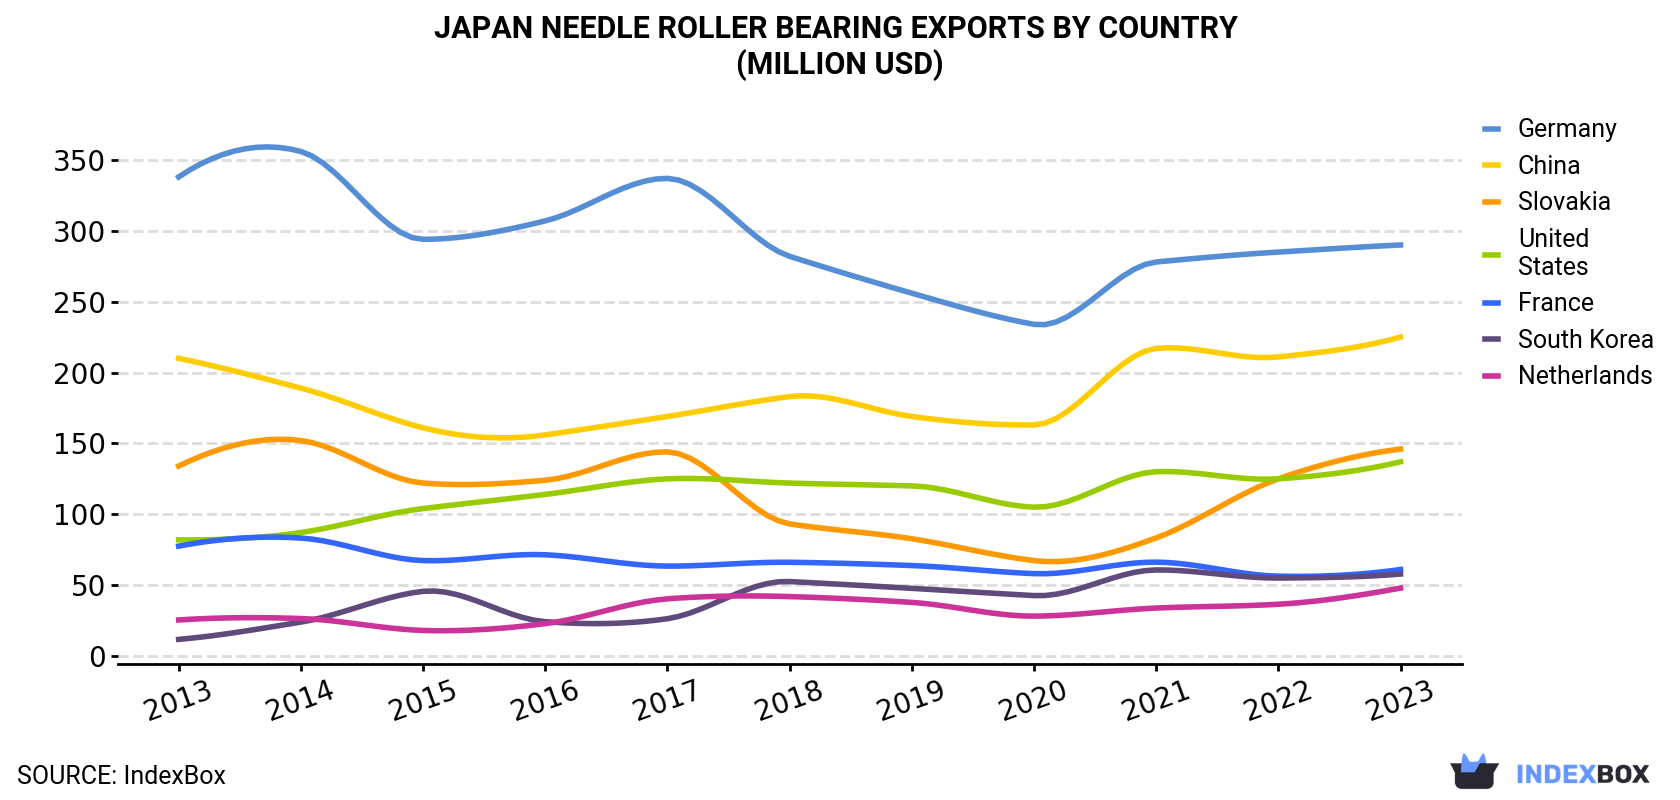 Japan Needle Roller Bearing Exports By Country (Million USD)